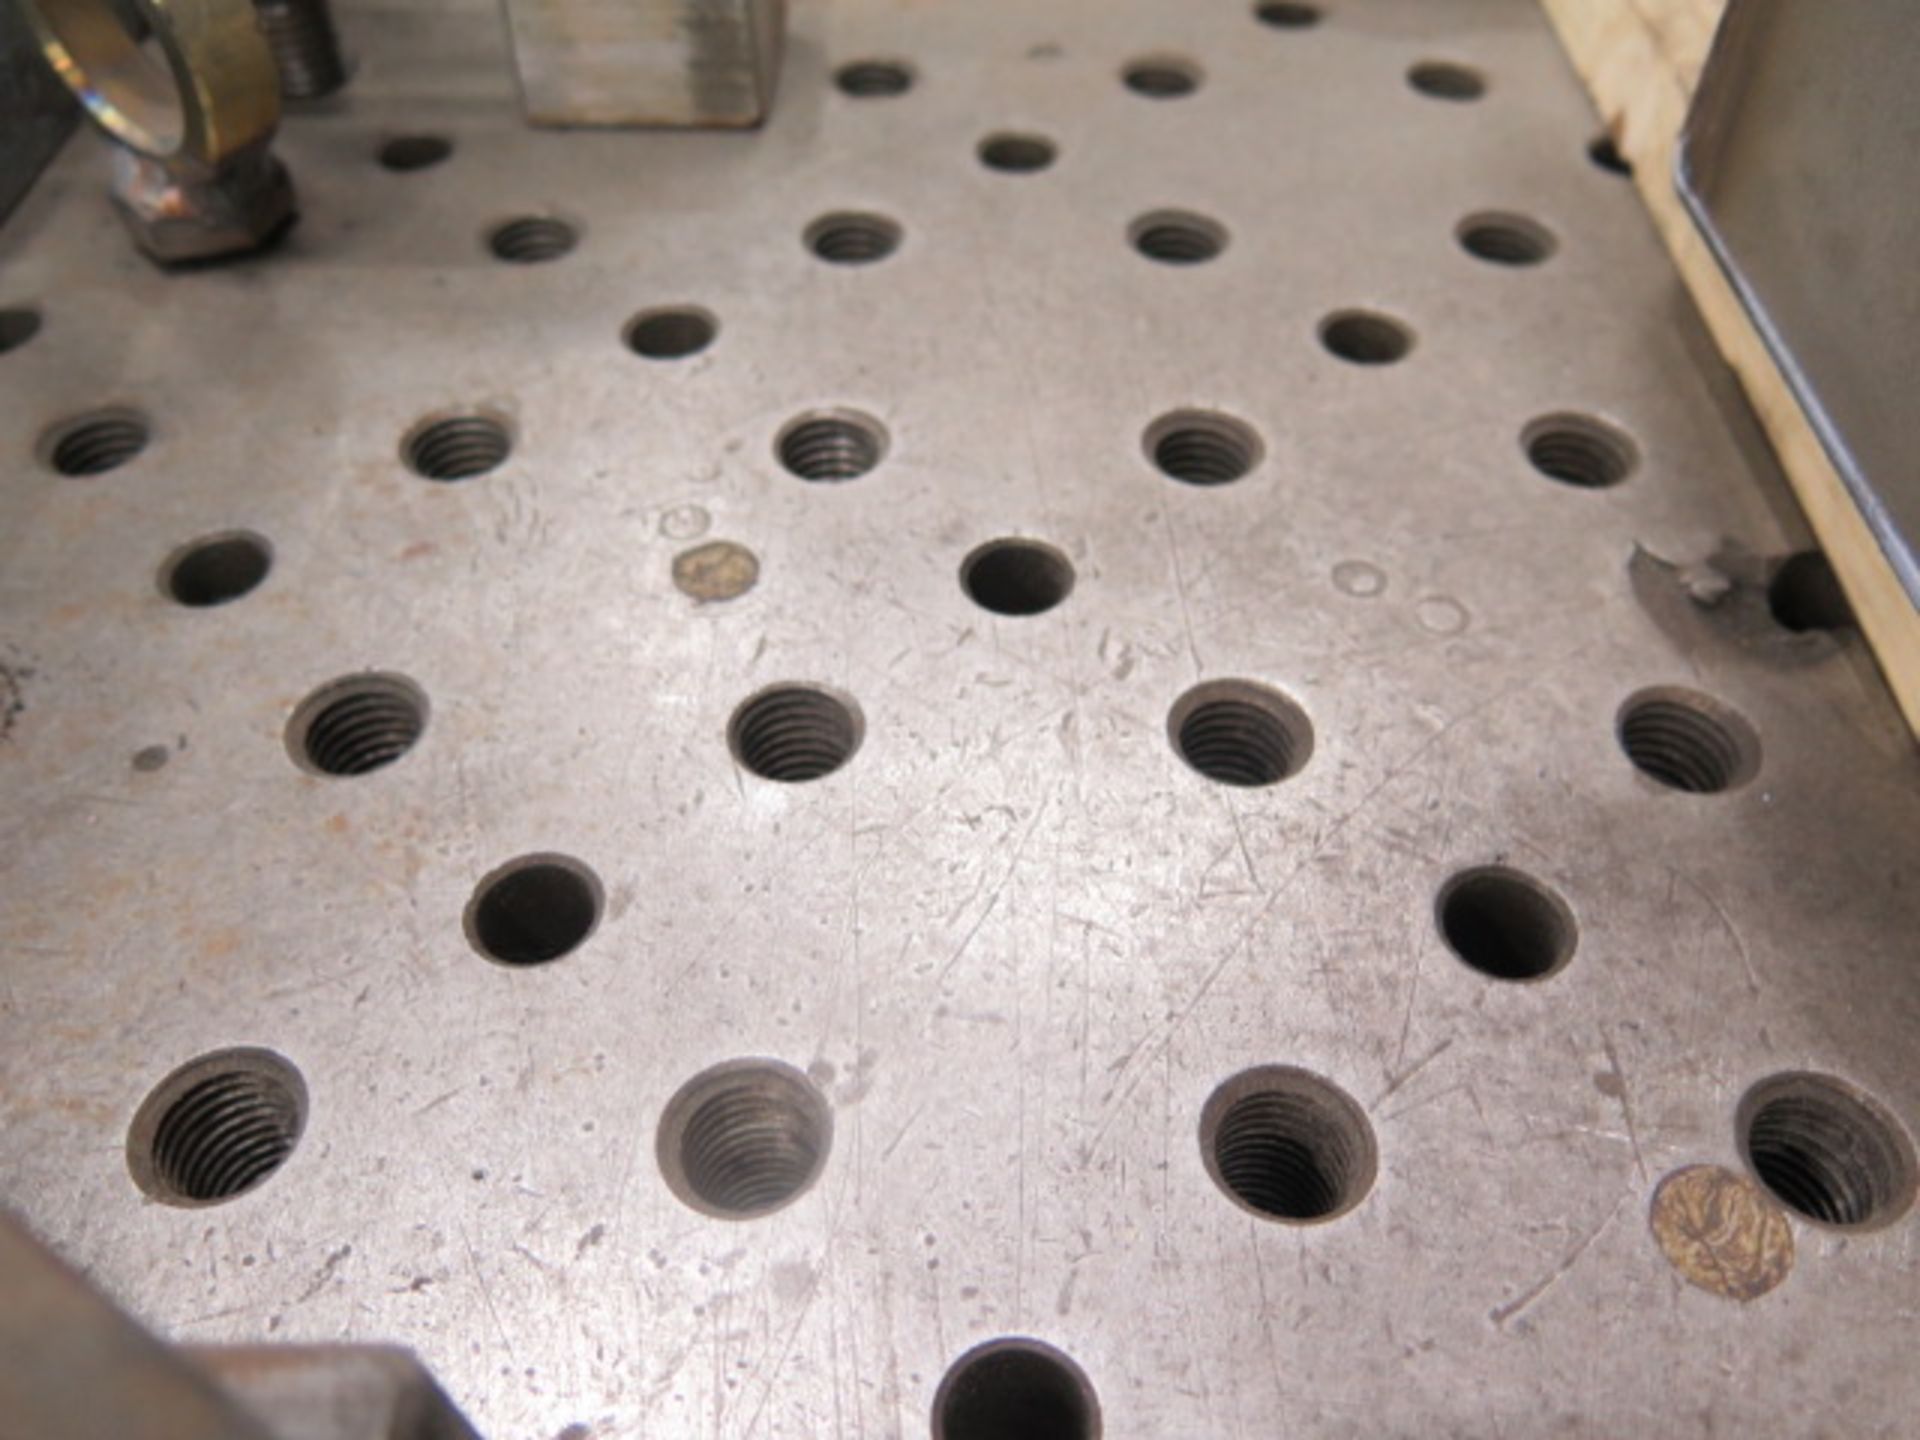 18” x 47” Tapped-Hole Fabrication Table w/ Angle Plates (SOLD AS-IS - NO WARRANTY) - Image 5 of 6